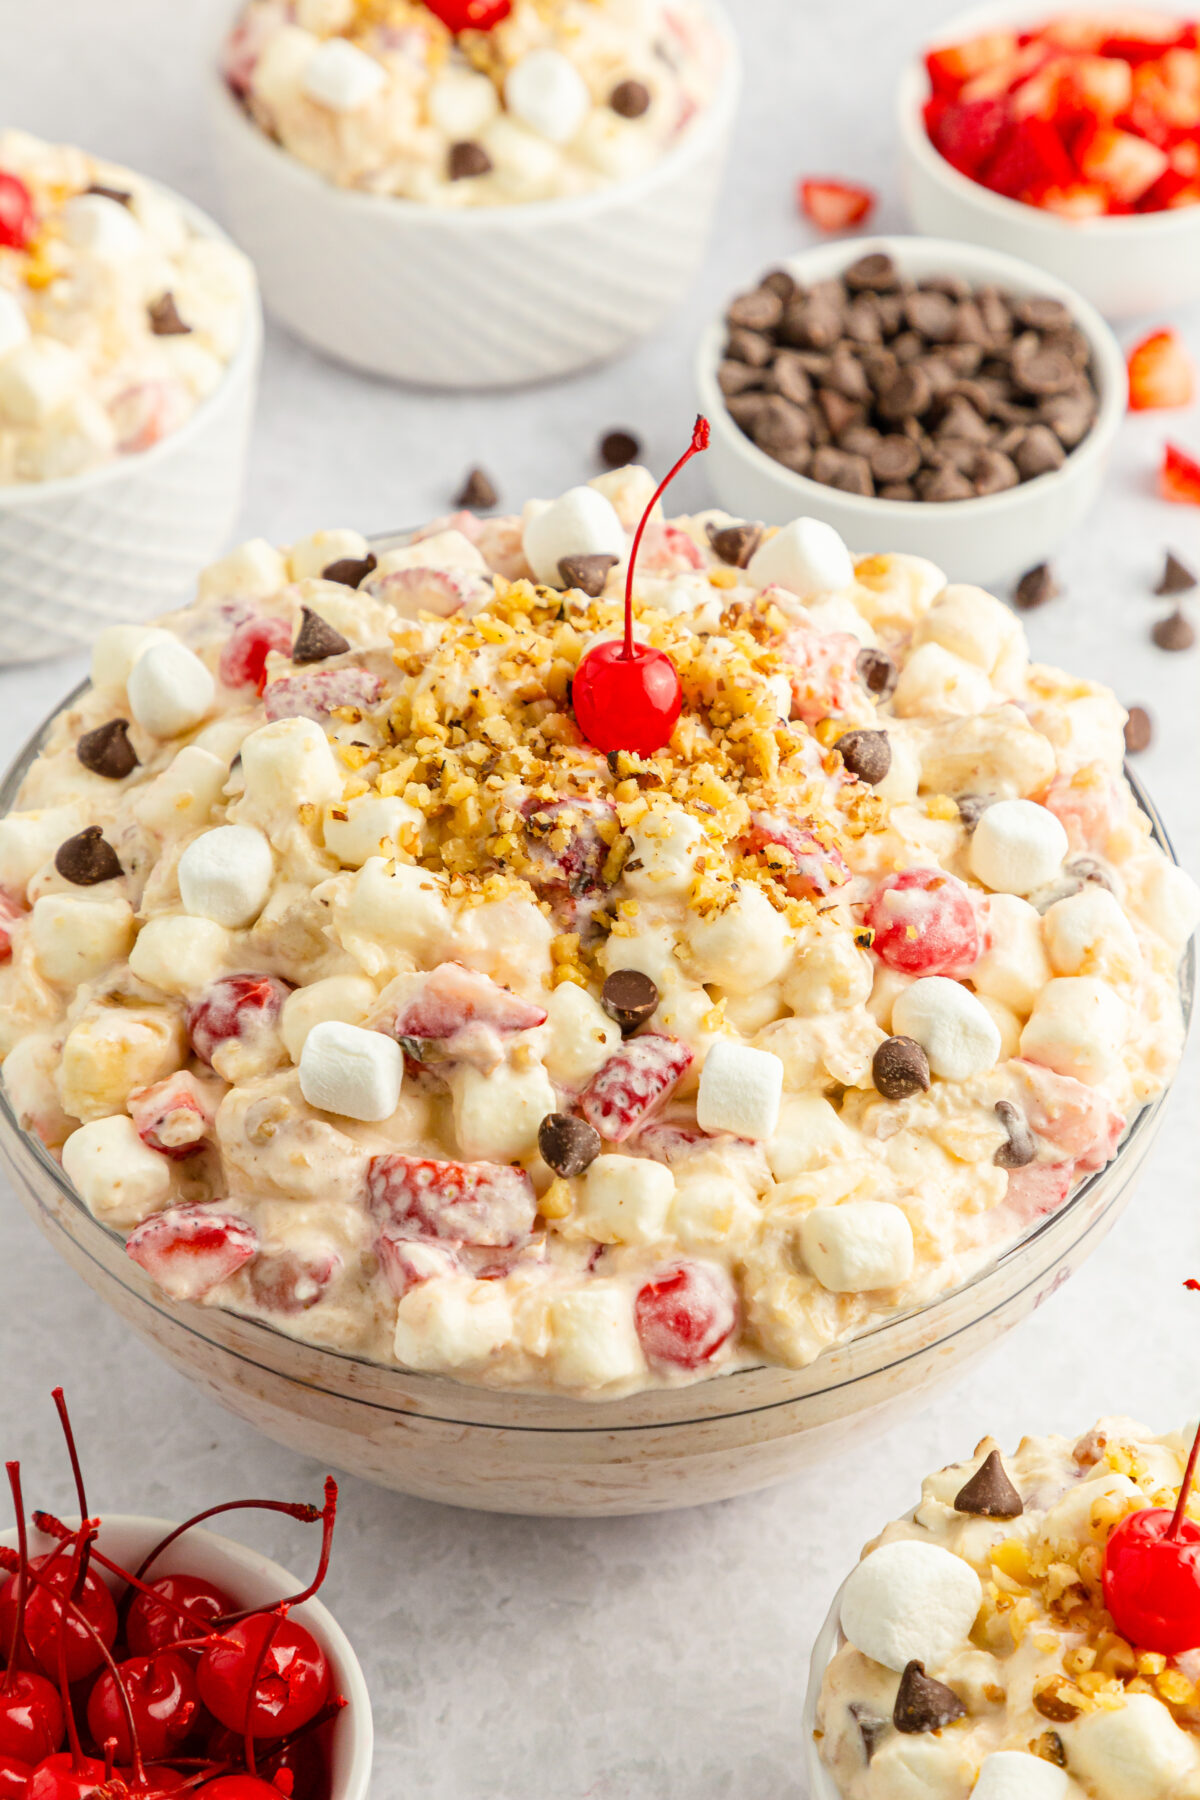 Whip up this banana split fluff salad for a fun and delicious summer treat that's perfect for potlucks, barbecues, or just because.